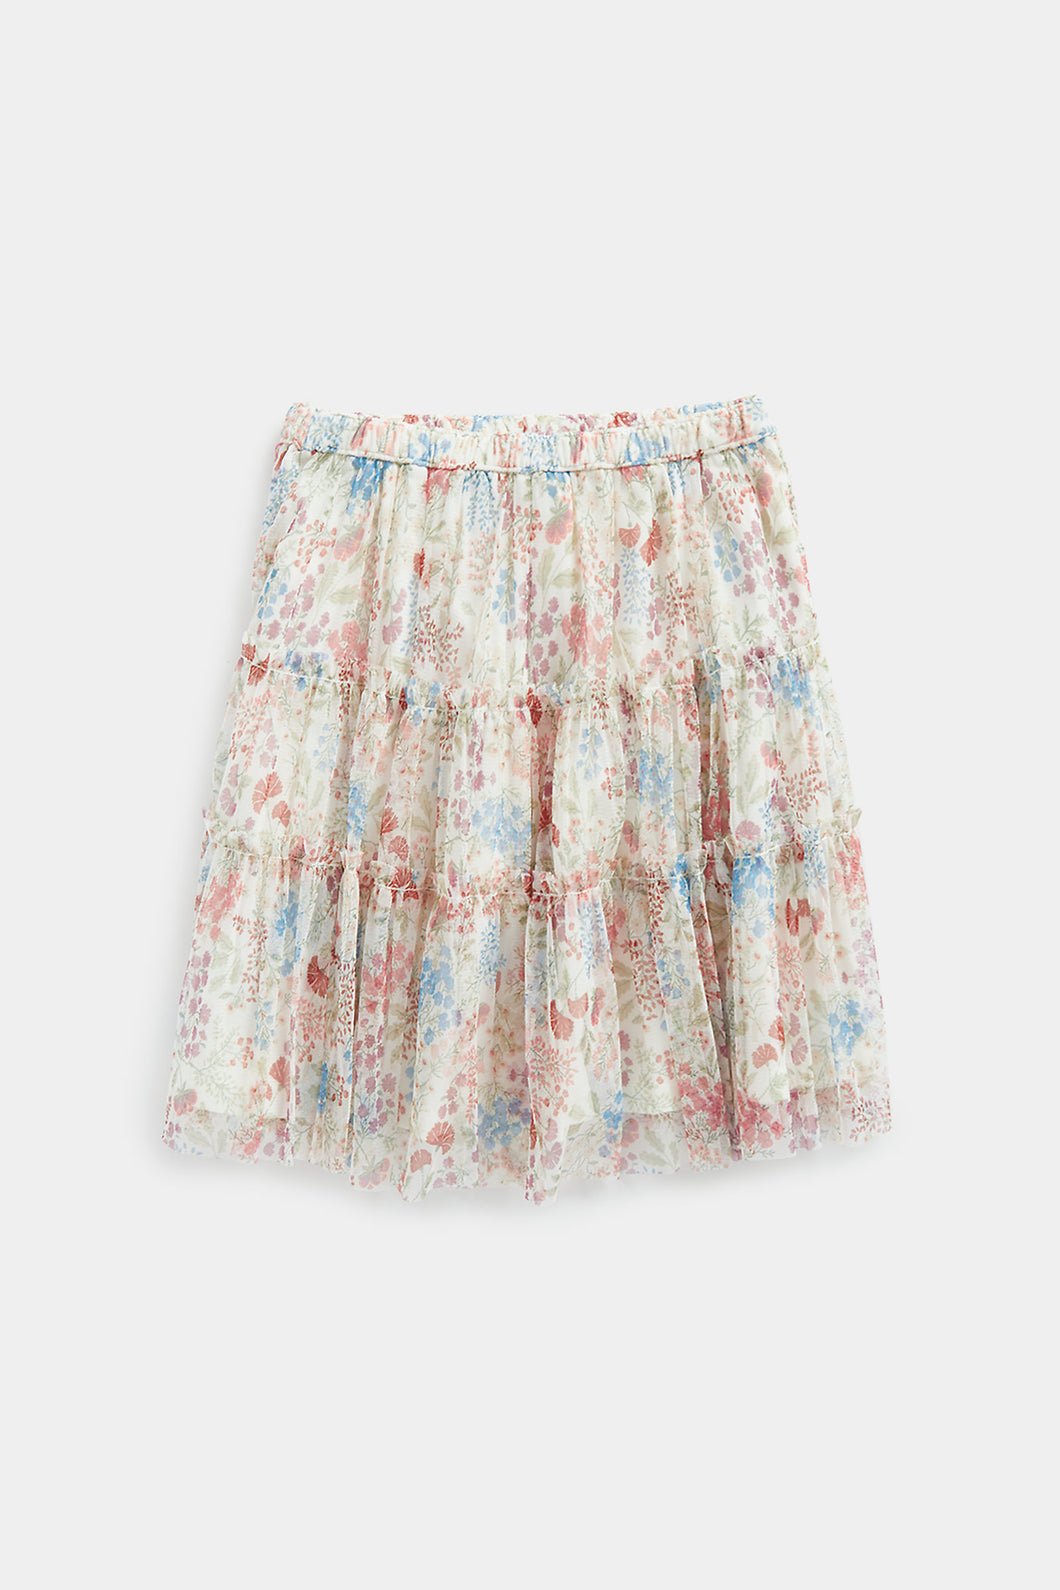 Mothercare Floral Mesh Skirt